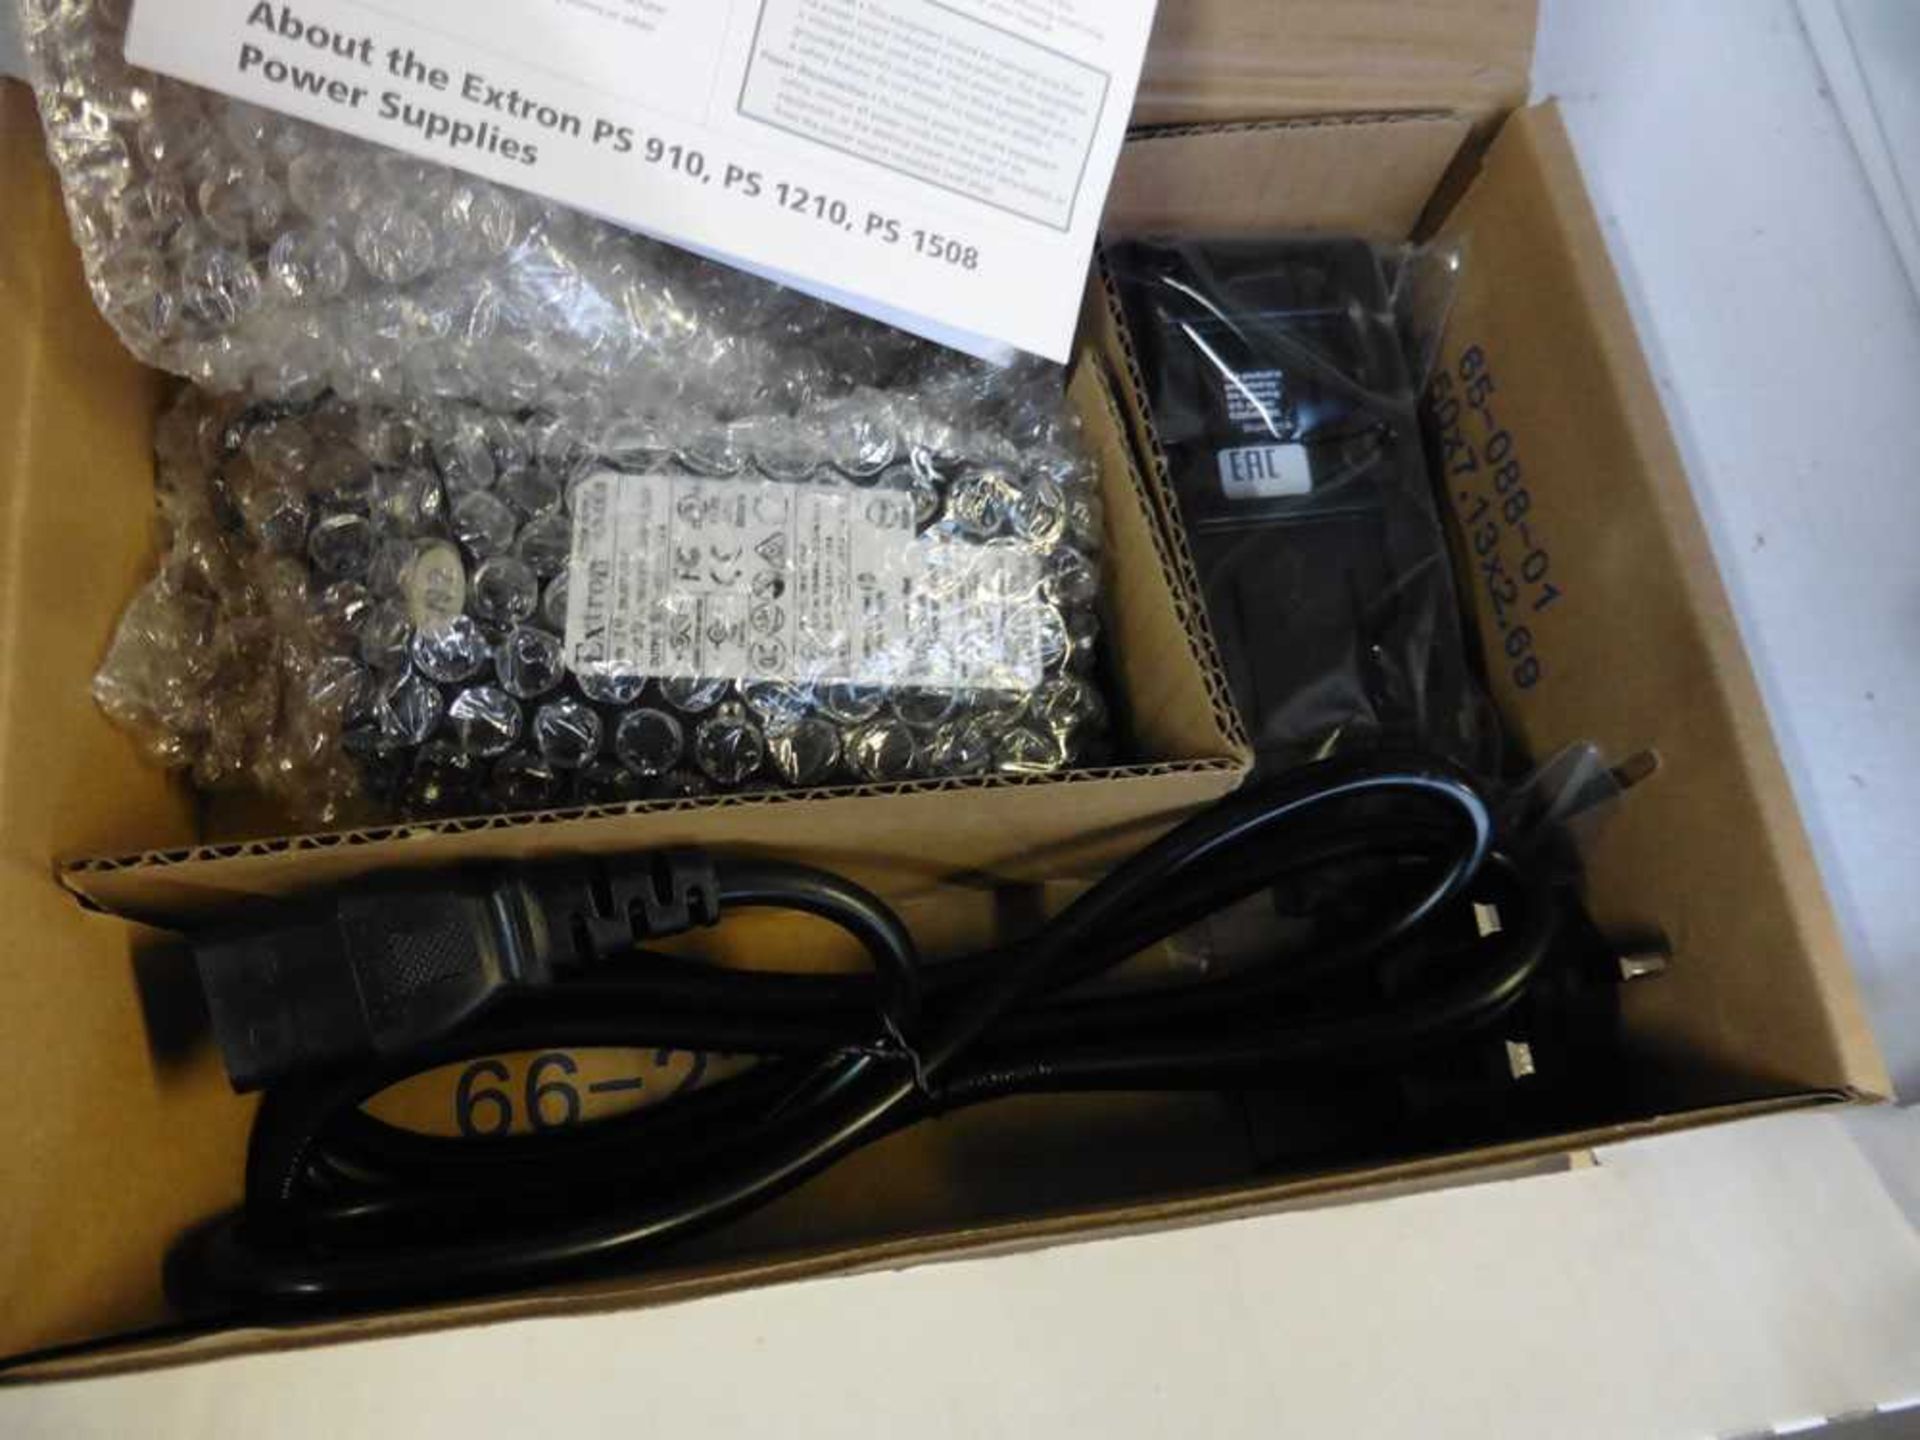 +VAT 2 Extron PS121OP external PSU with 12v output 1 amp with box - Image 2 of 2